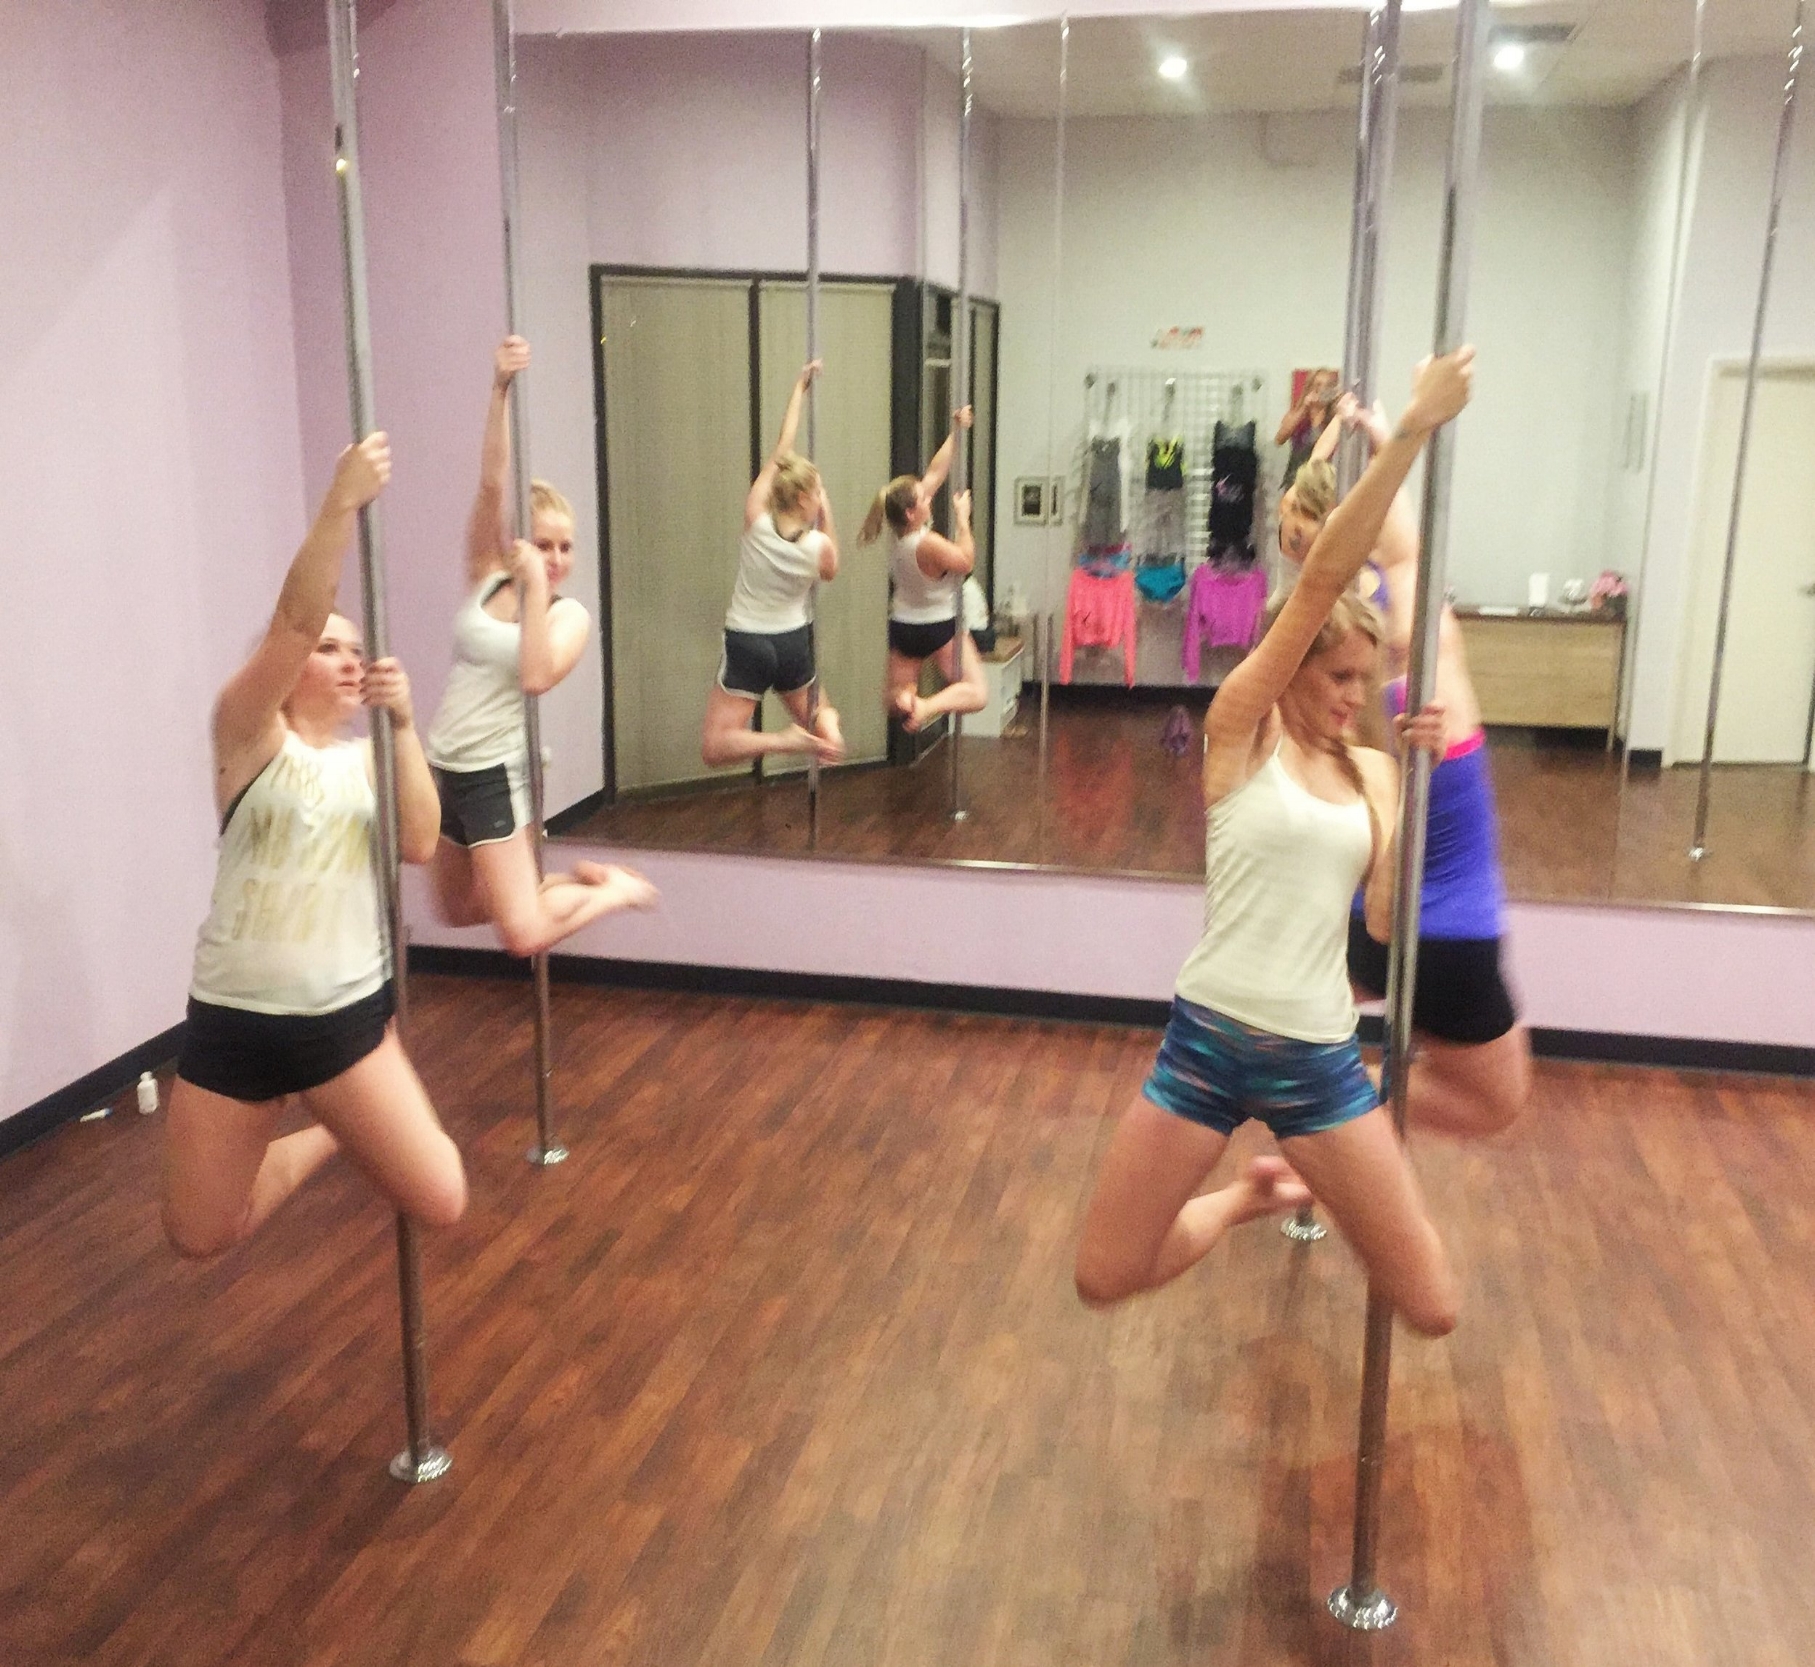 Pole Dancing Workout Videos on